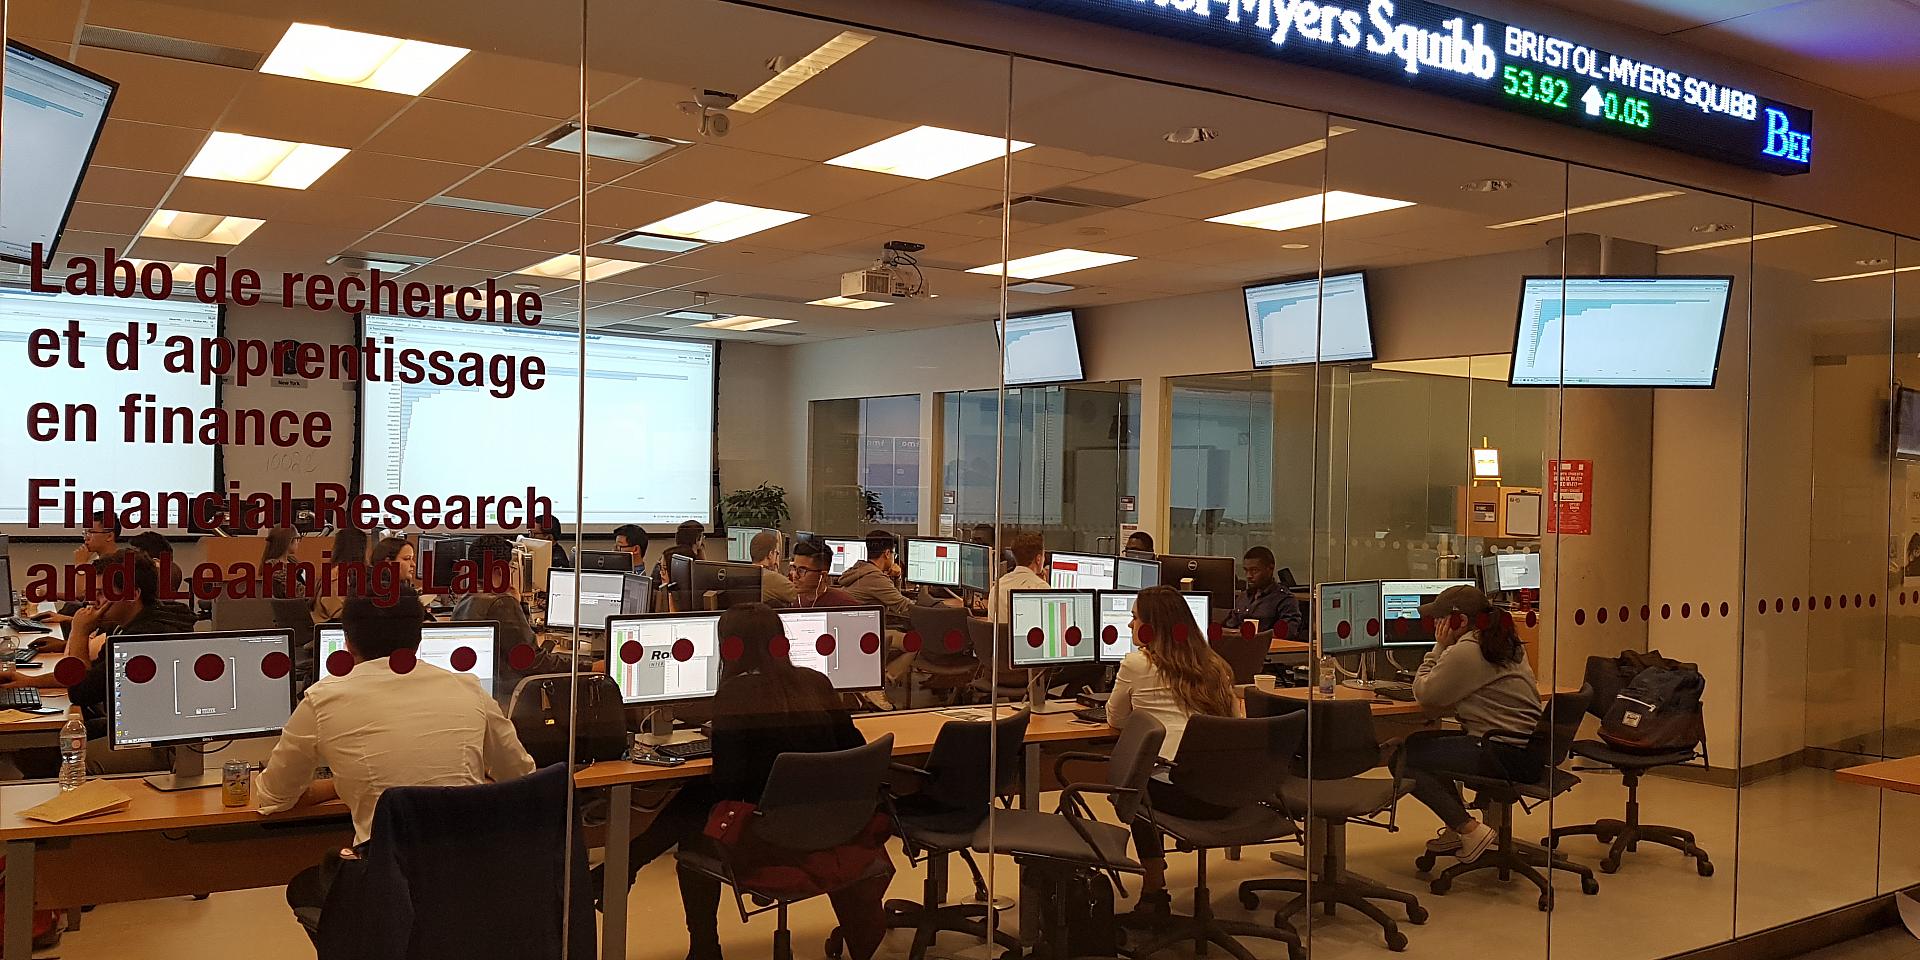 Financial Research and Learning Lab